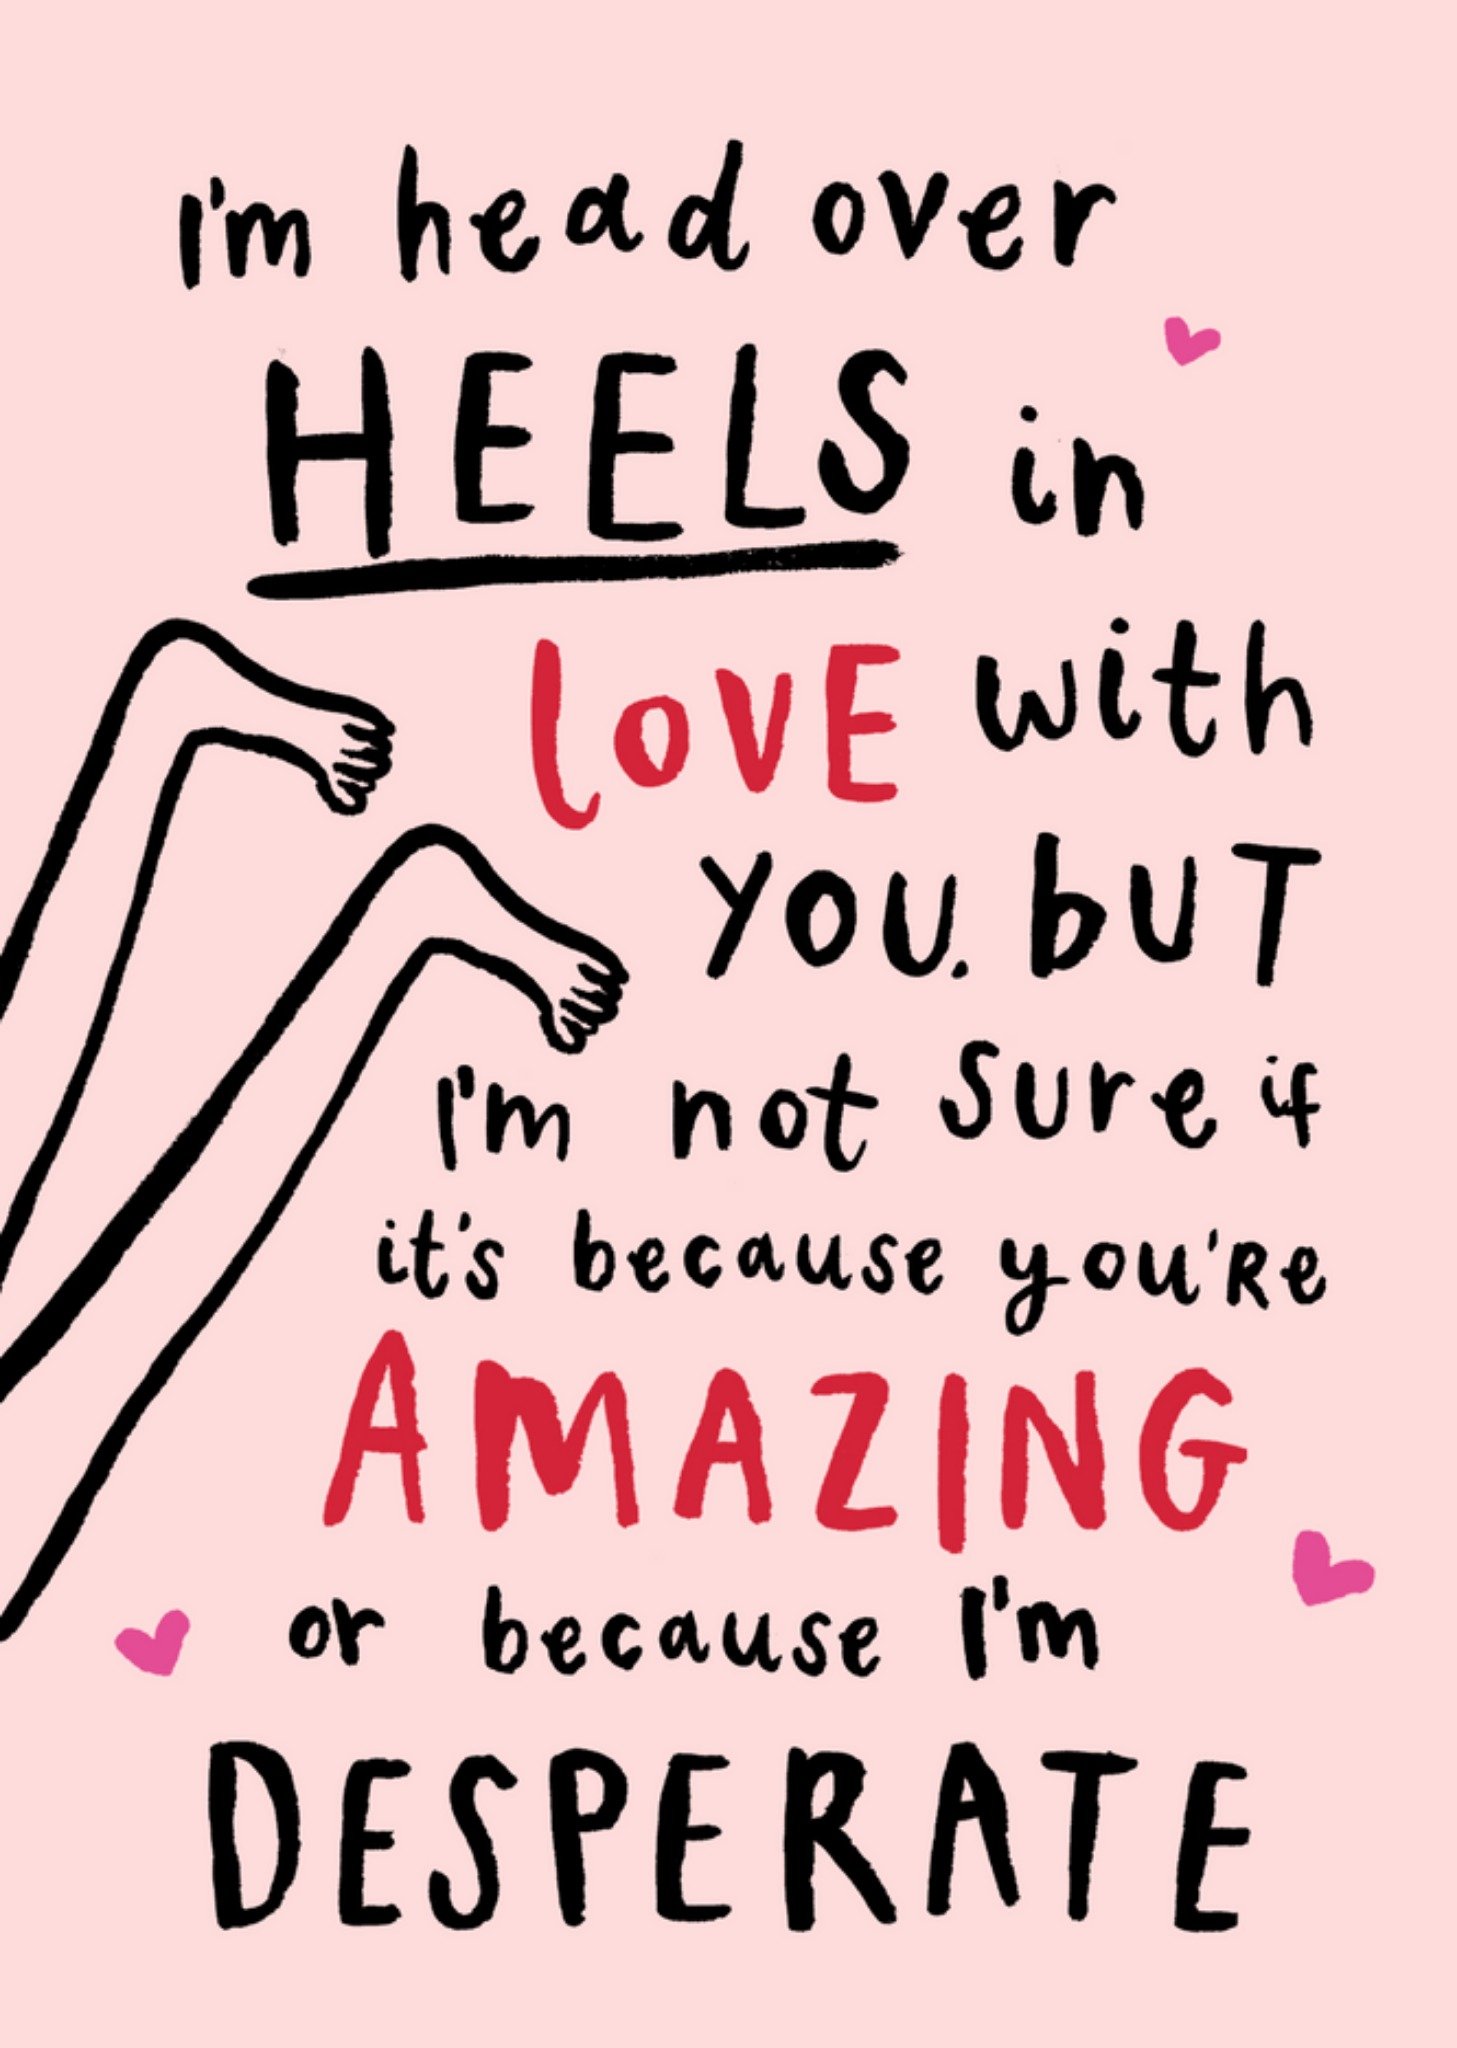 Moonpig Funny Head Over Heels In Love With You Hand Drawn Typography Valentine's Day Card Ecard